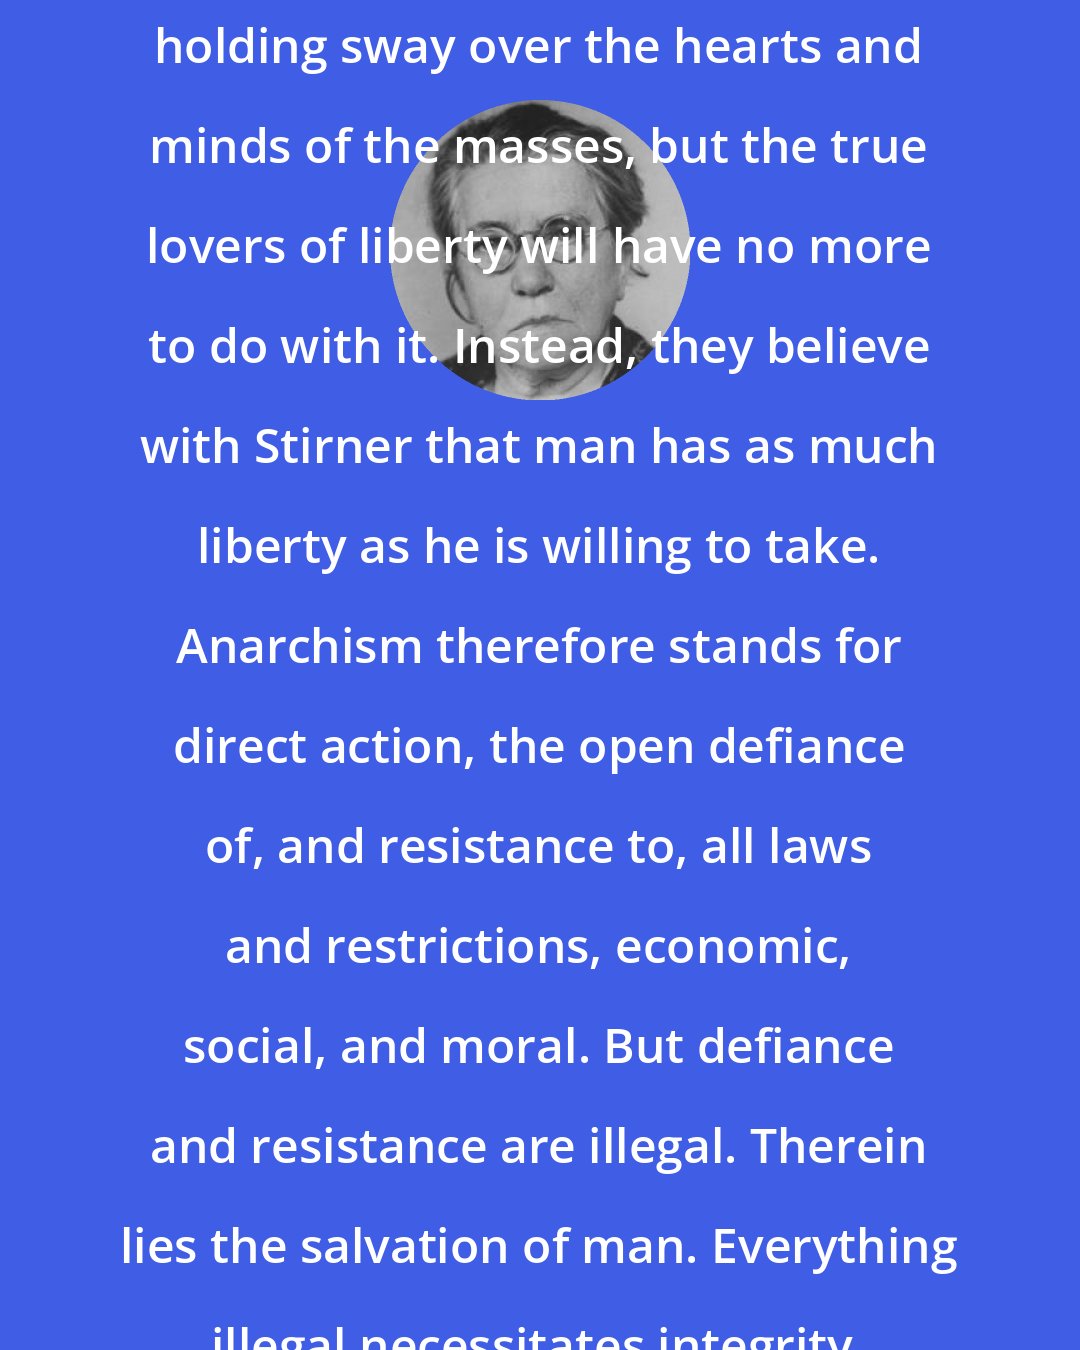 Emma Goldman: The political superstition is still holding sway over the hearts and minds of the masses, but the true lovers of liberty will have no more to do with it. Instead, they believe with Stirner that man has as much liberty as he is willing to take. Anarchism therefore stands for direct action, the open defiance of, and resistance to, all laws and restrictions, economic, social, and moral. But defiance and resistance are illegal. Therein lies the salvation of man. Everything illegal necessitates integrity, self-reliance and courage.